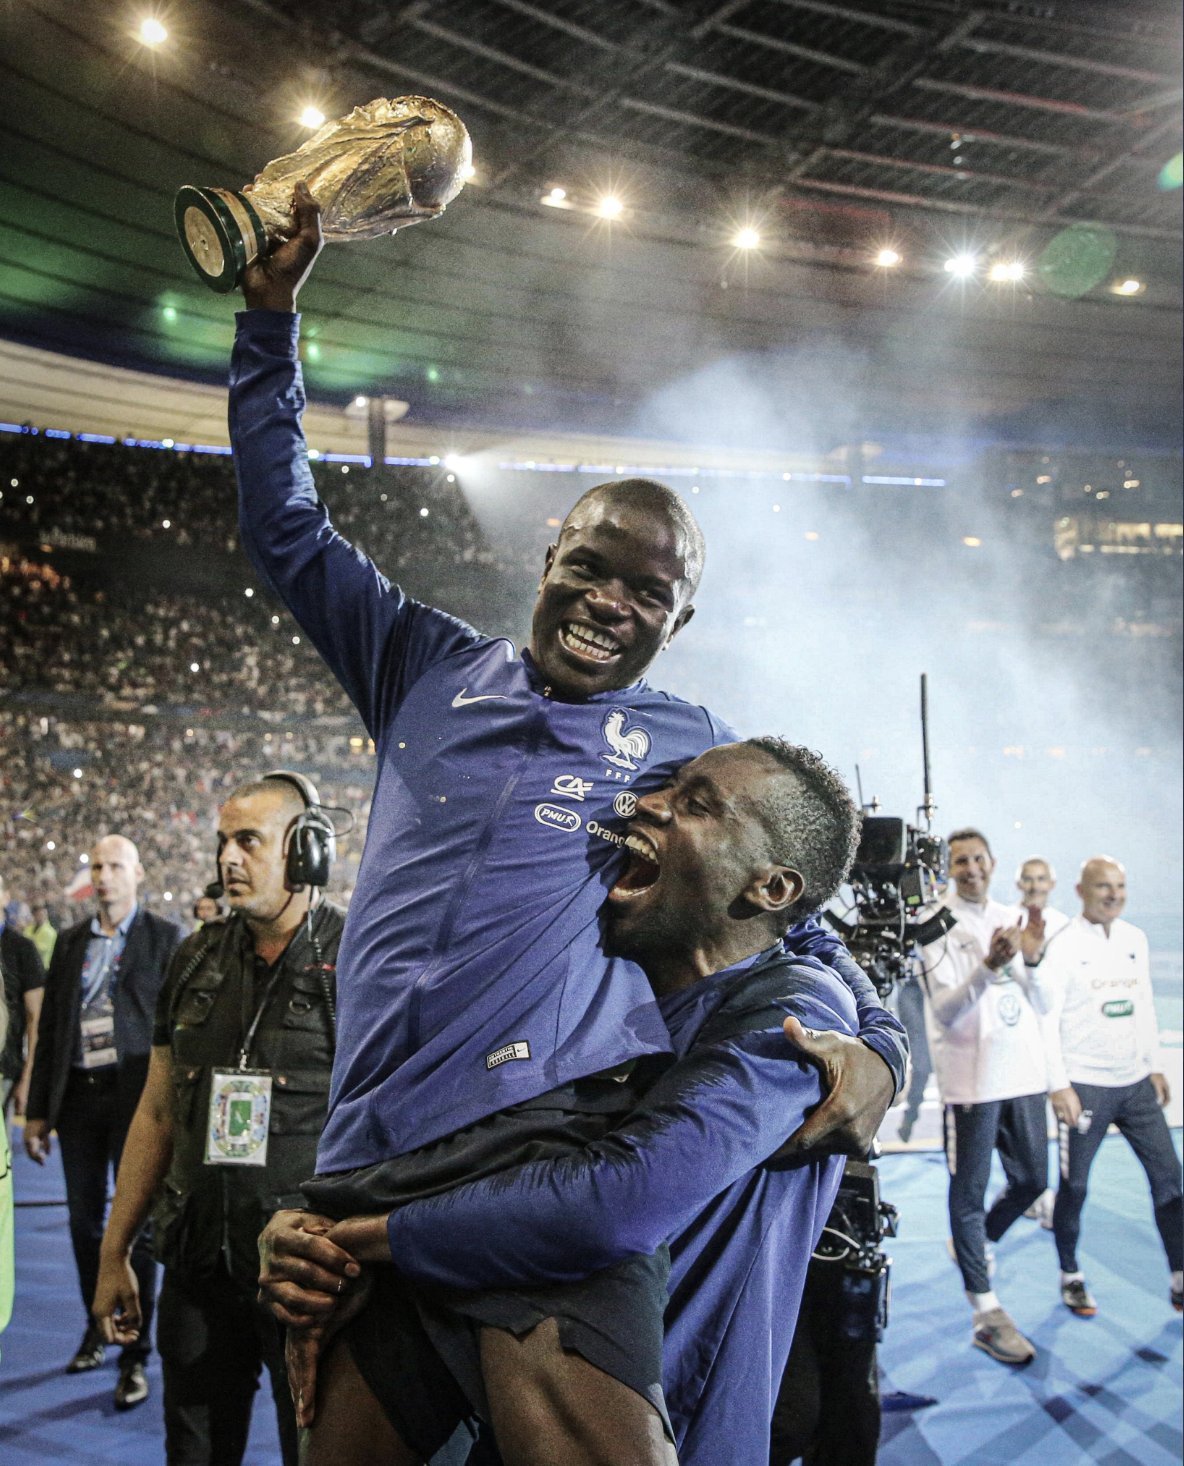 Kante will miss the world cup